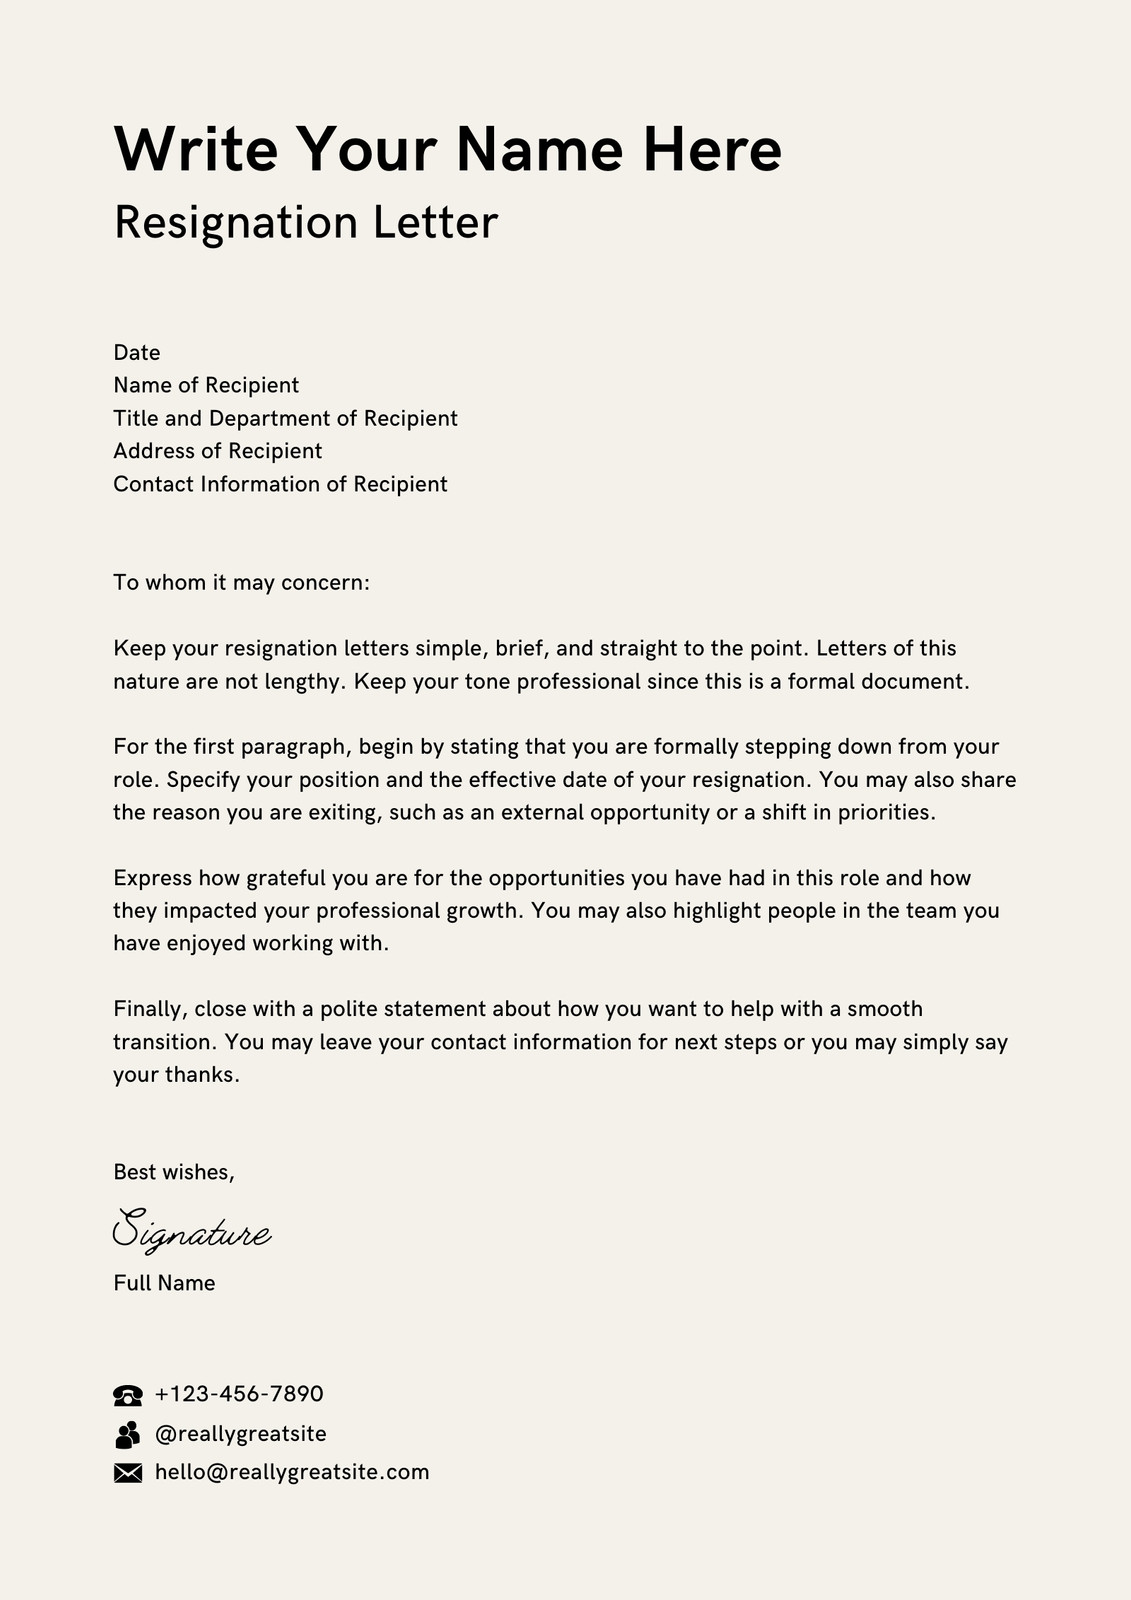 Free to edit and print resignation letter templates